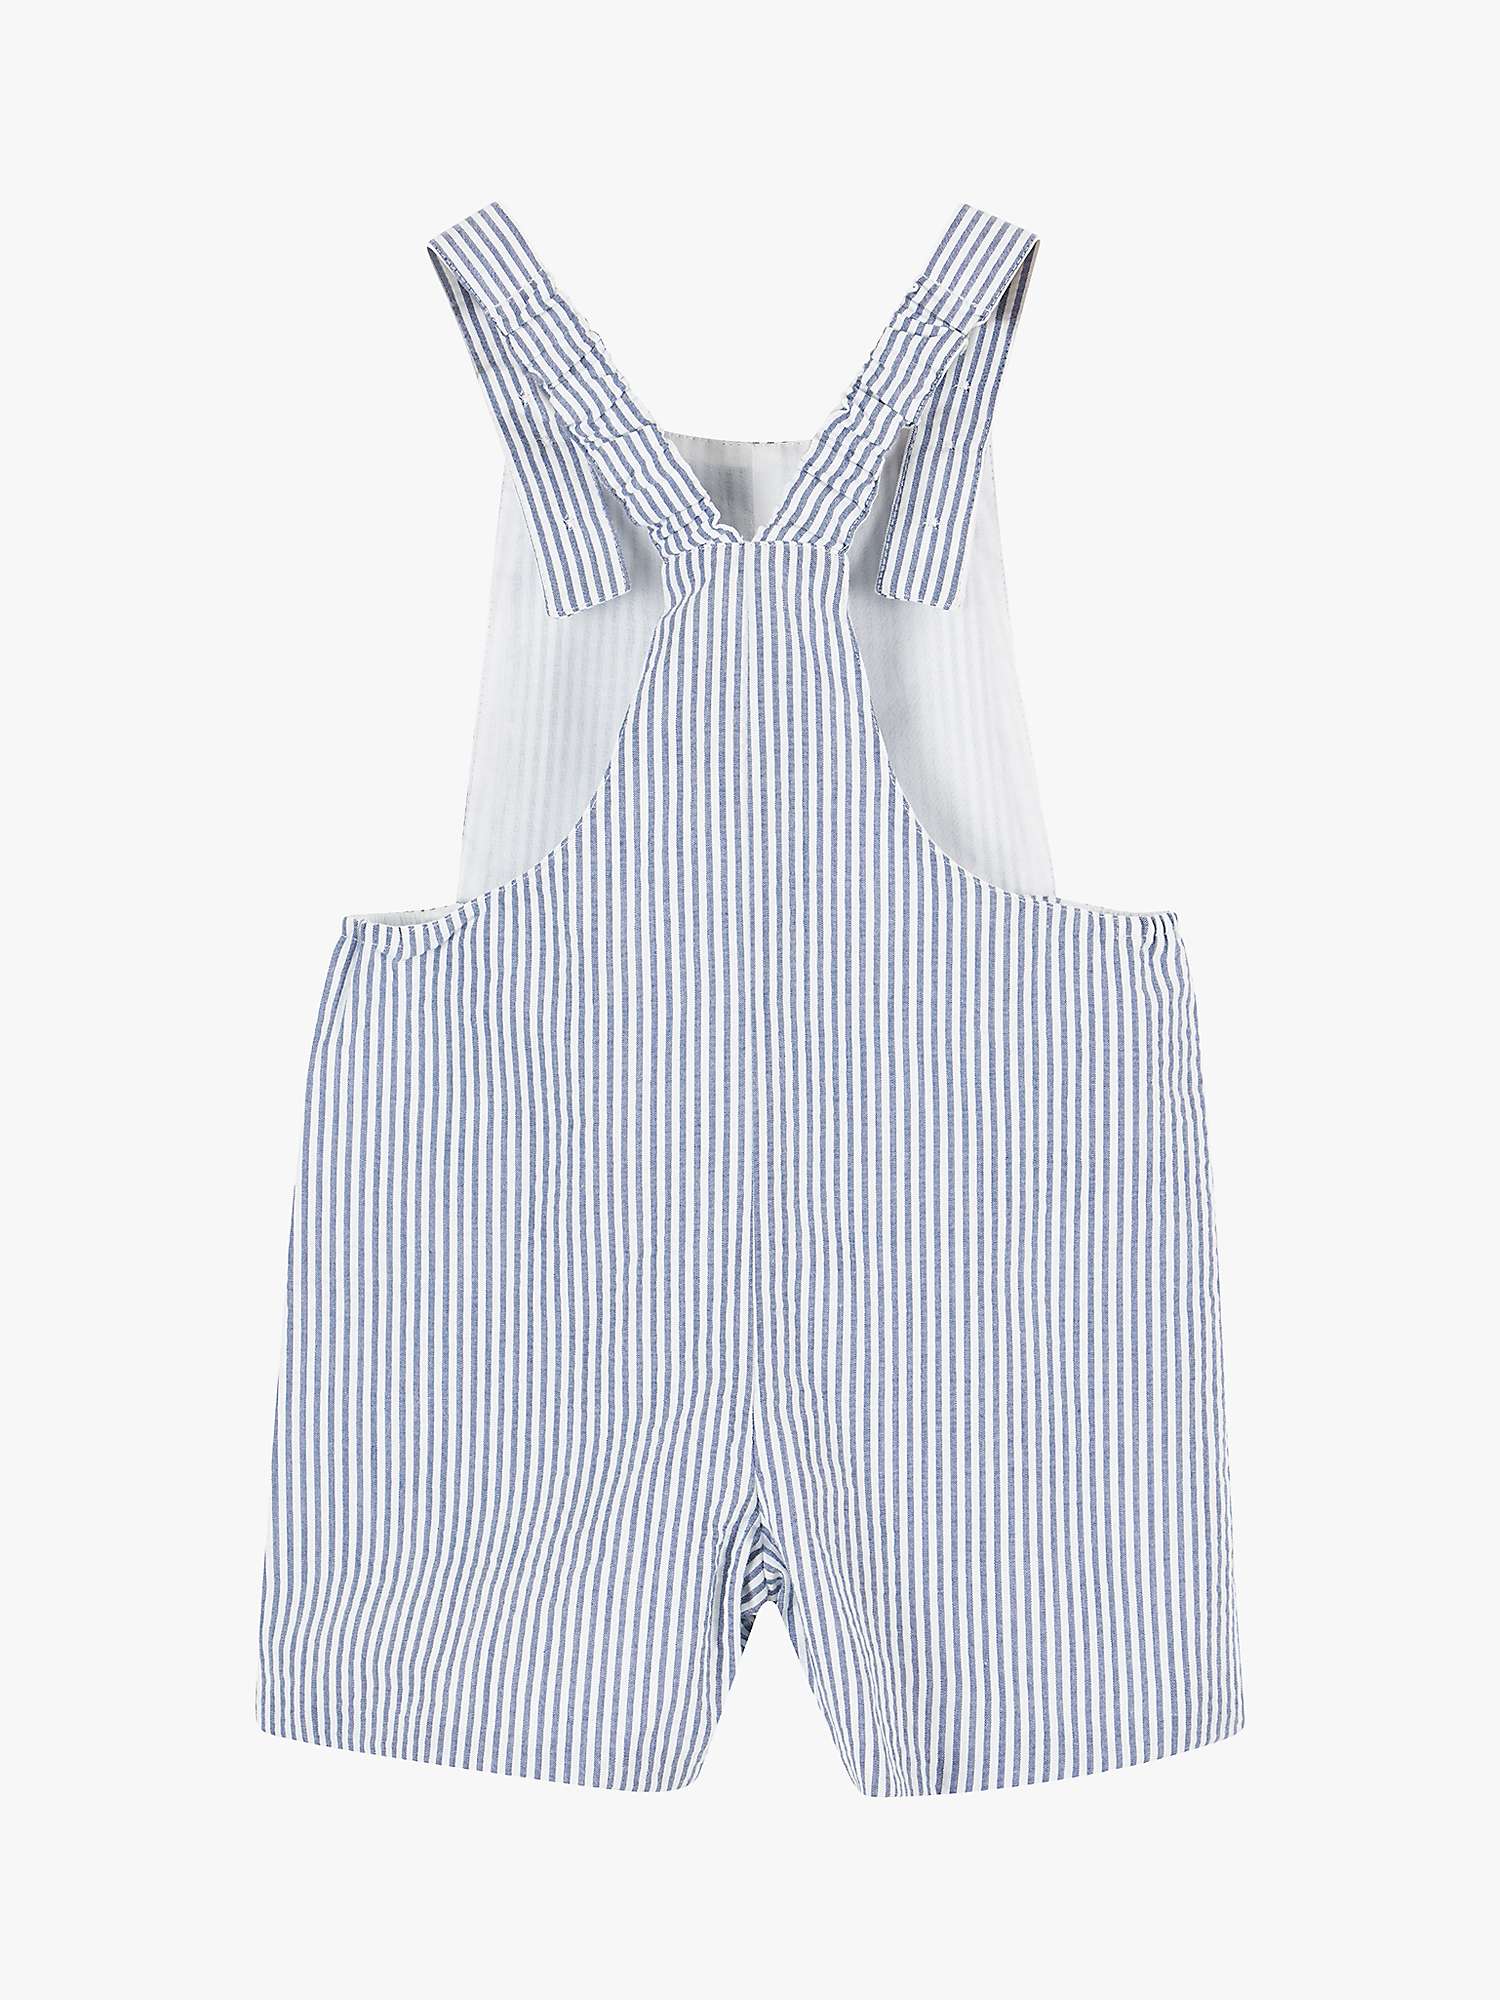 Buy Trotters Baby Alexander Shorts Dungarees Online at johnlewis.com